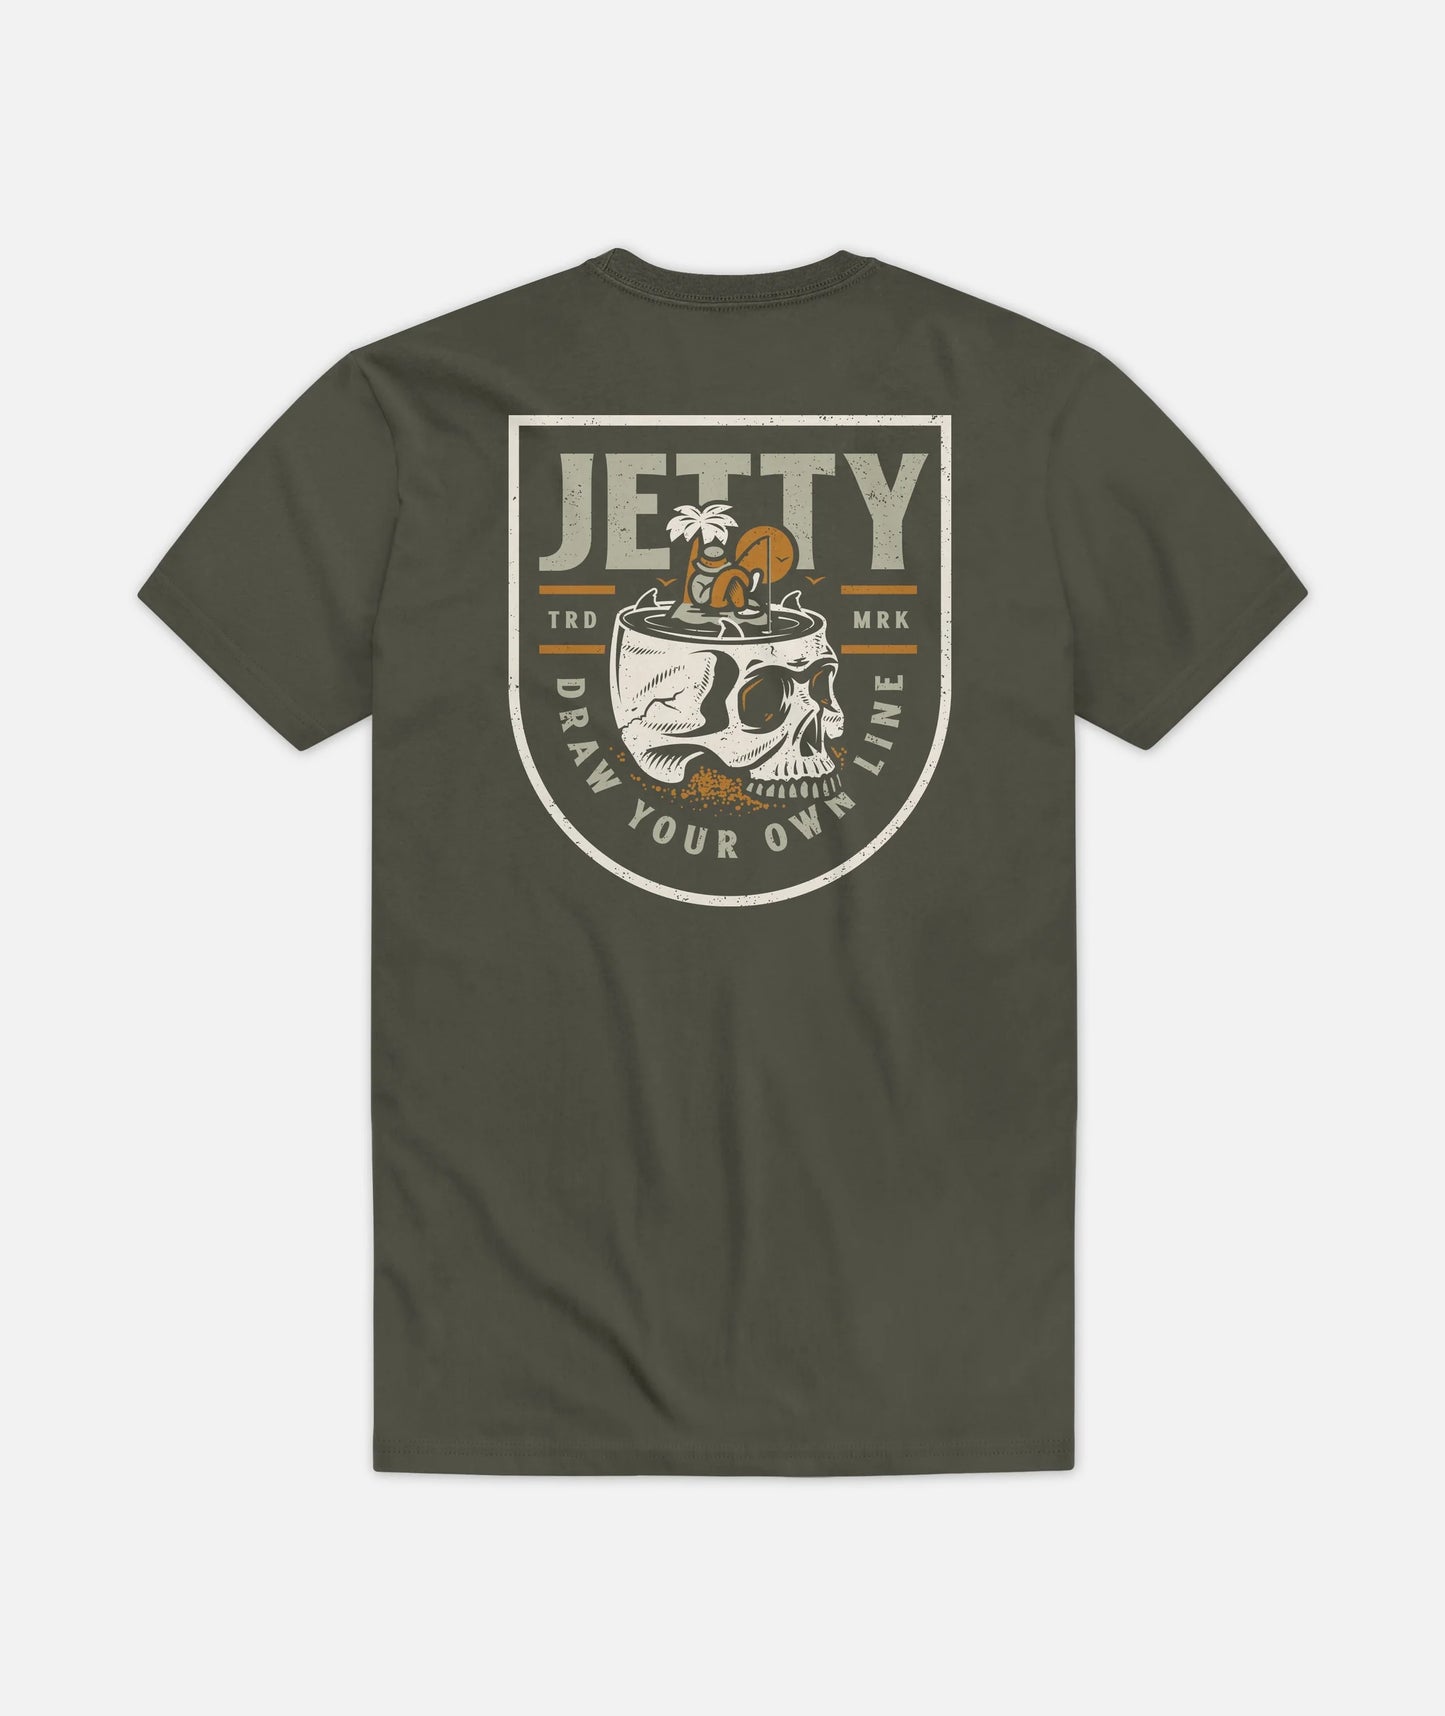 Stranded Tee - Storm and Sky Shoppe - Jetty